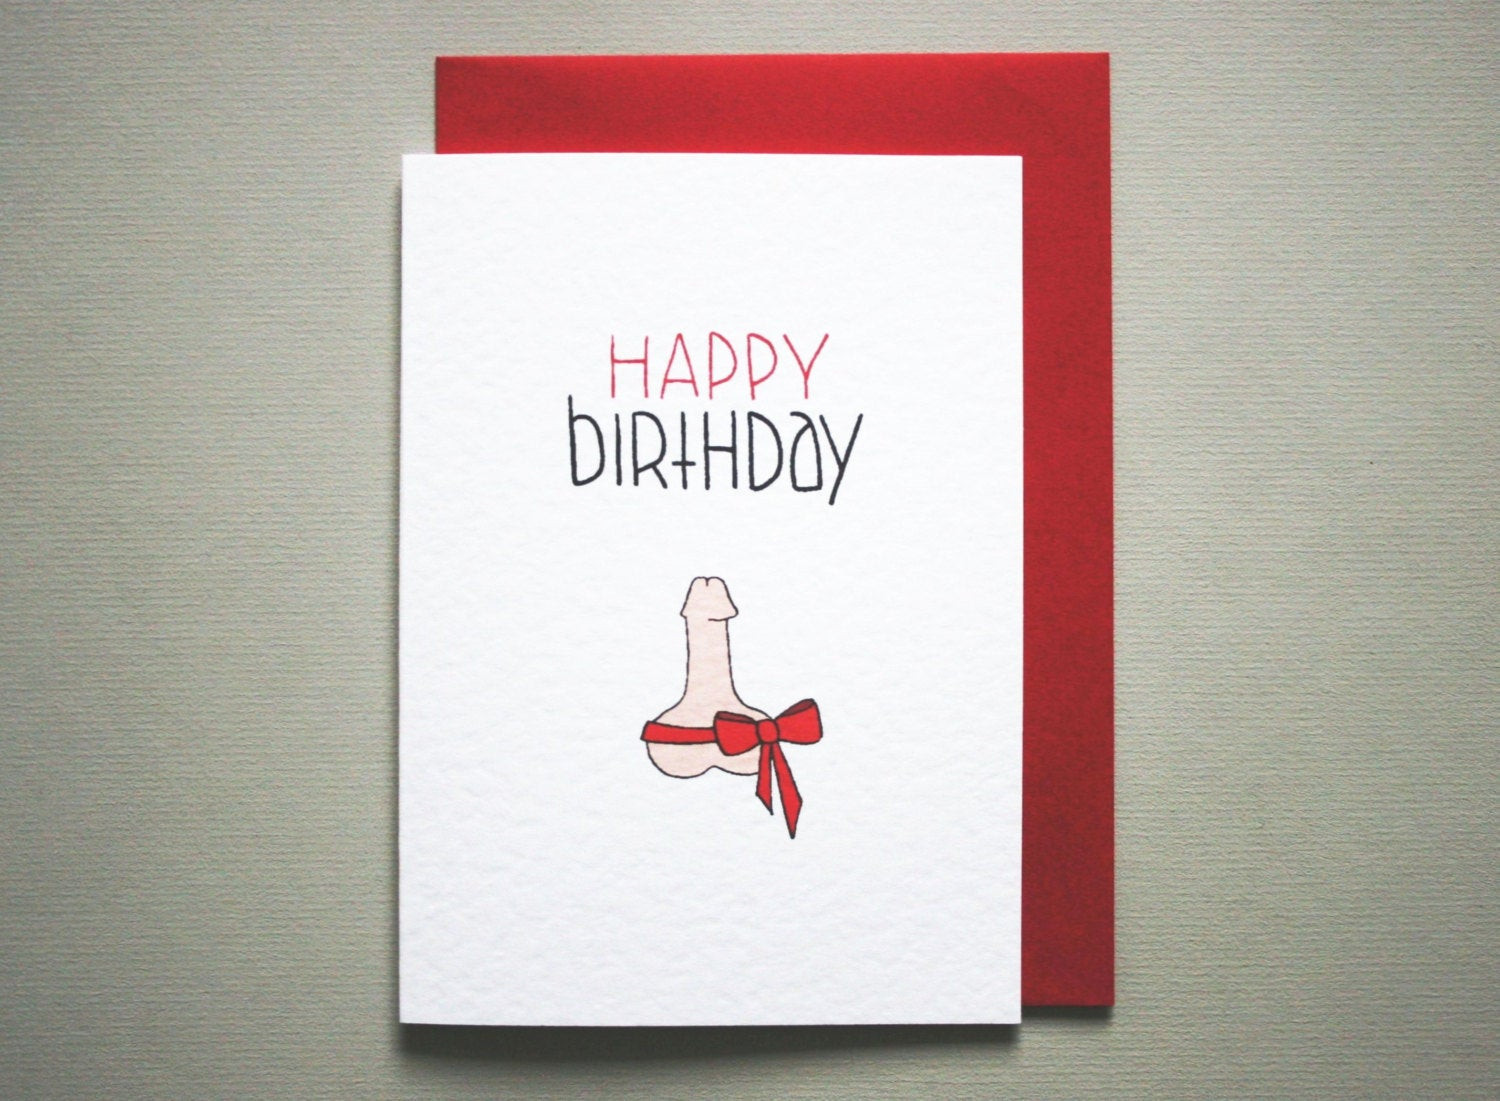 Happy Birthday Cards For Her Funny
 funny happy birthday card girlfriend naughty birthday card